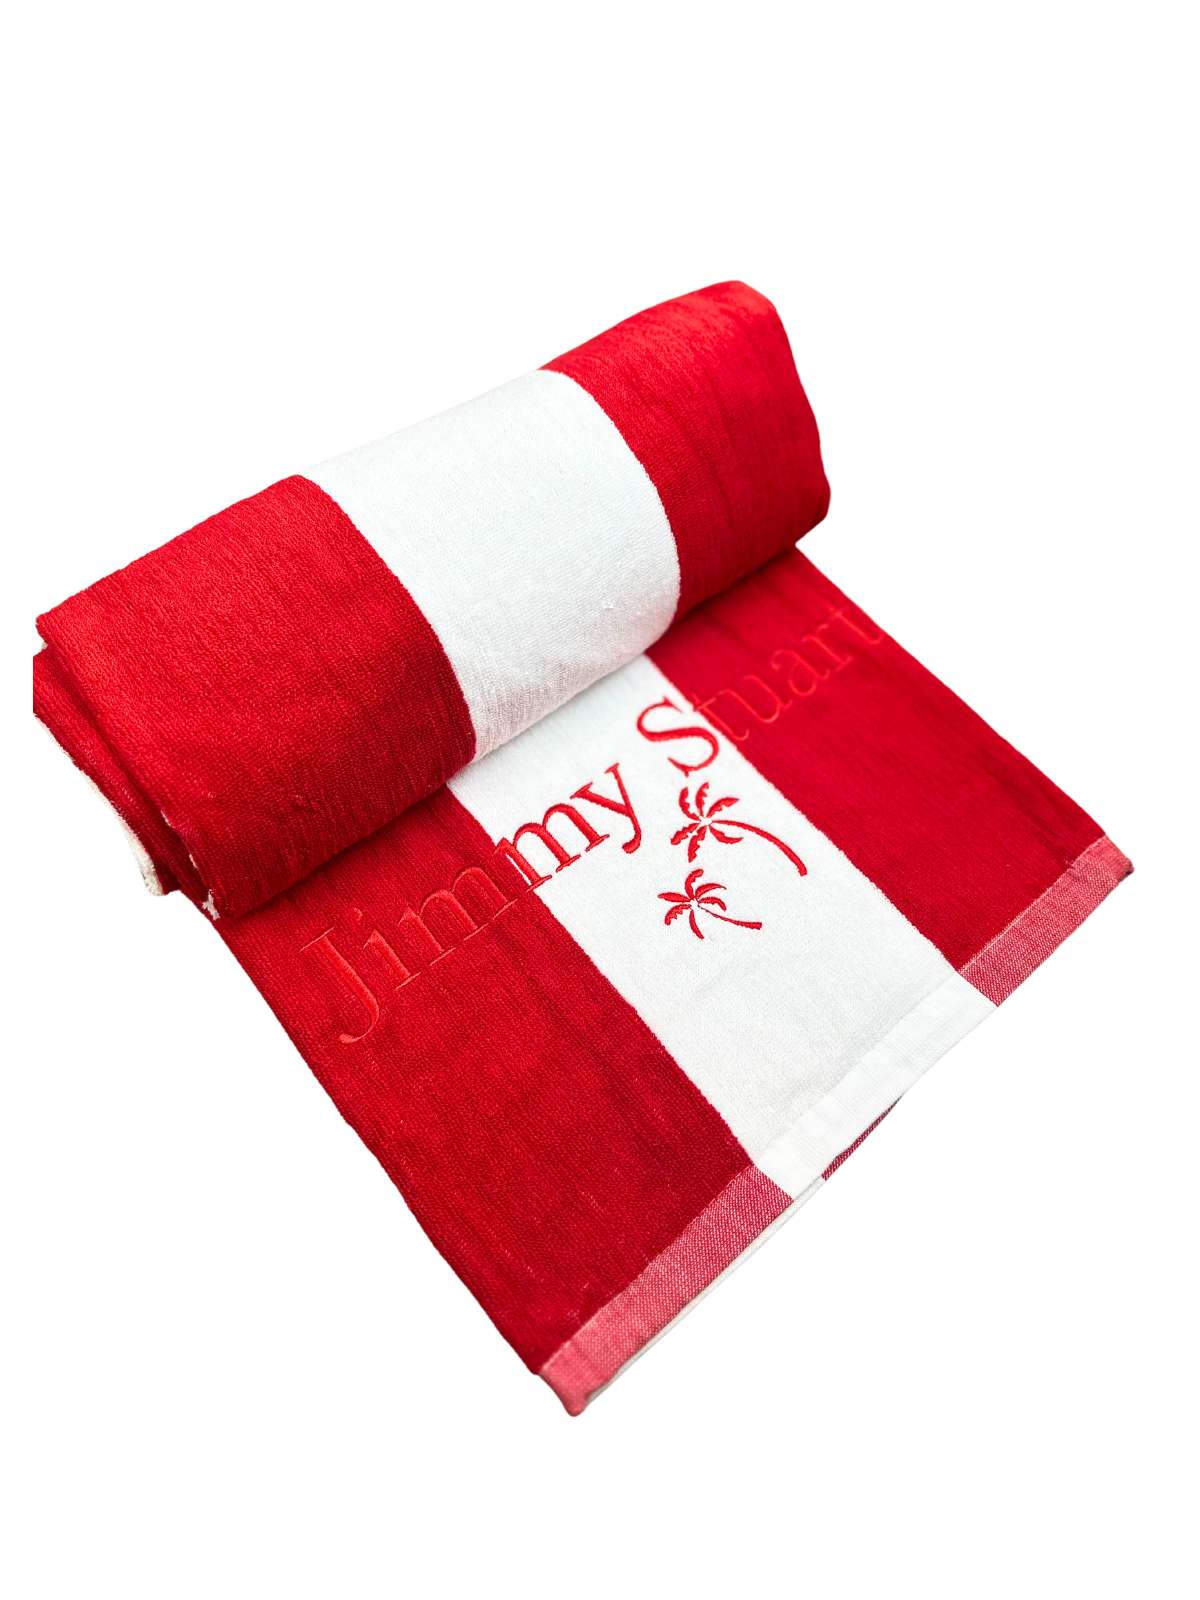 Red and White Striped Towel